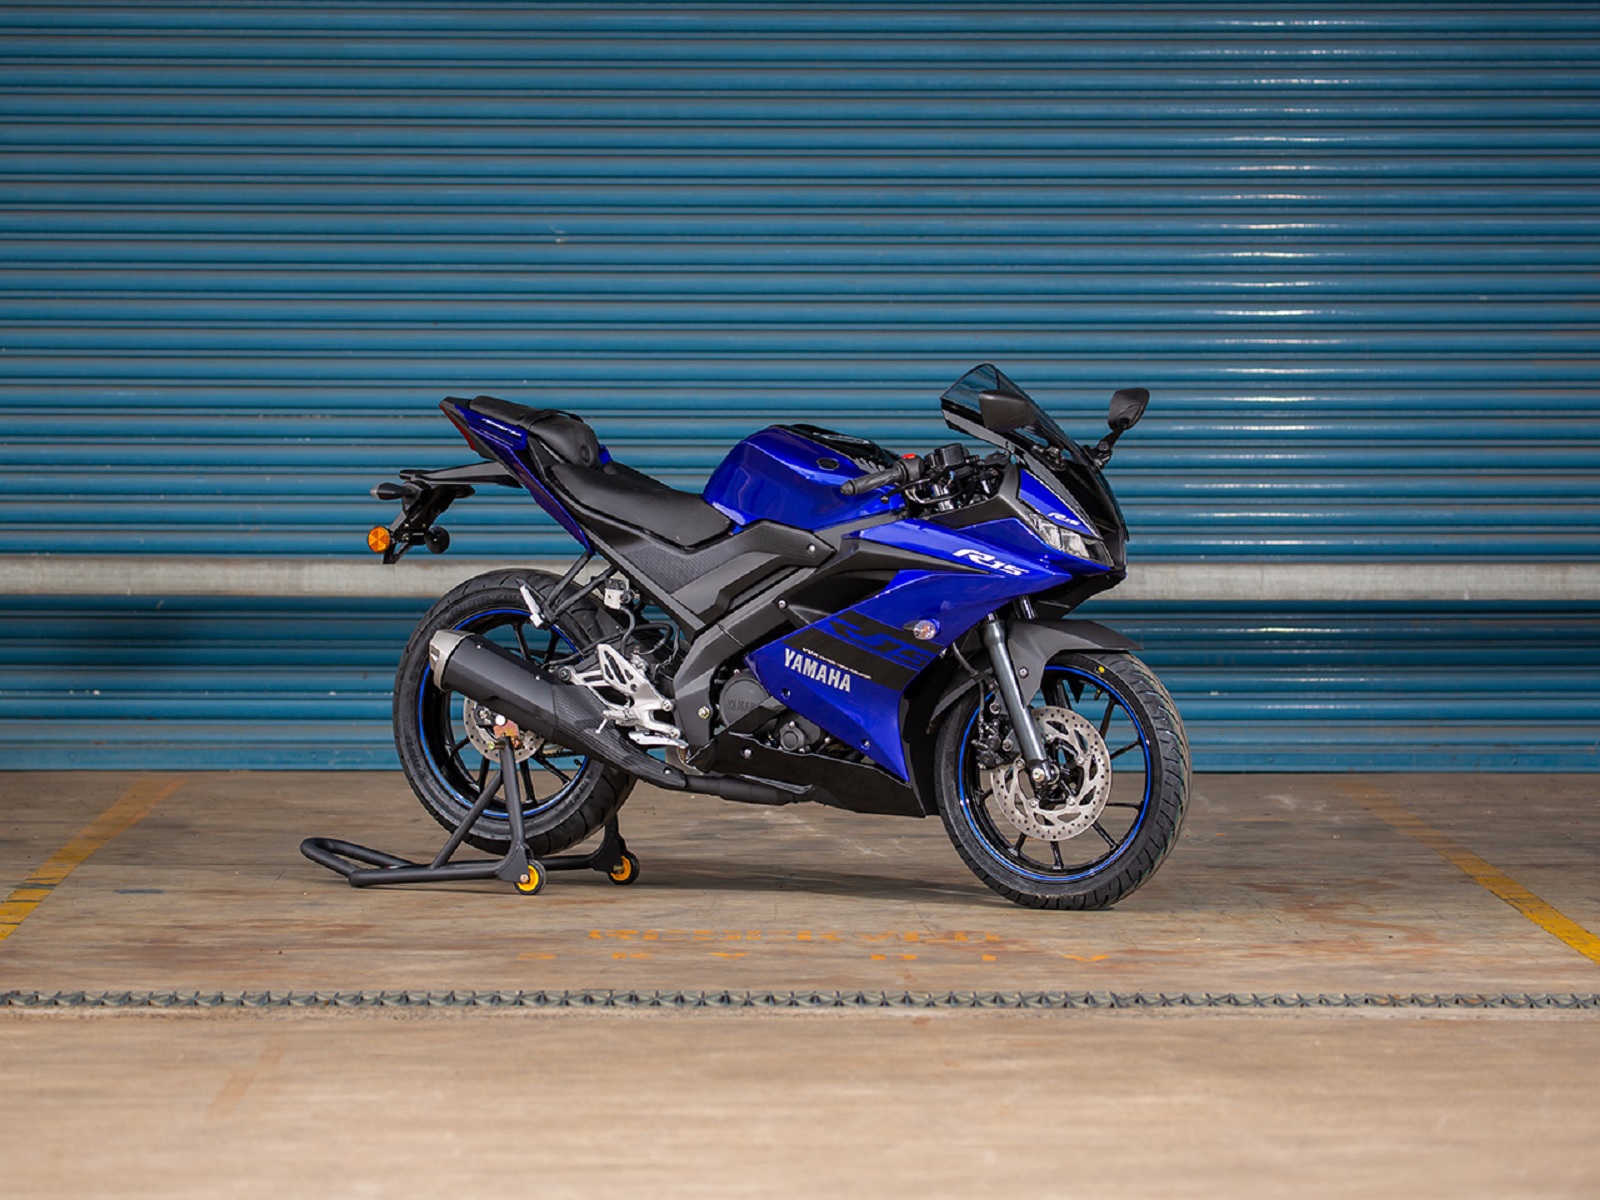 Yamaha's YZF R15M Is A Single Cylinder Sportbike The US Can't Have